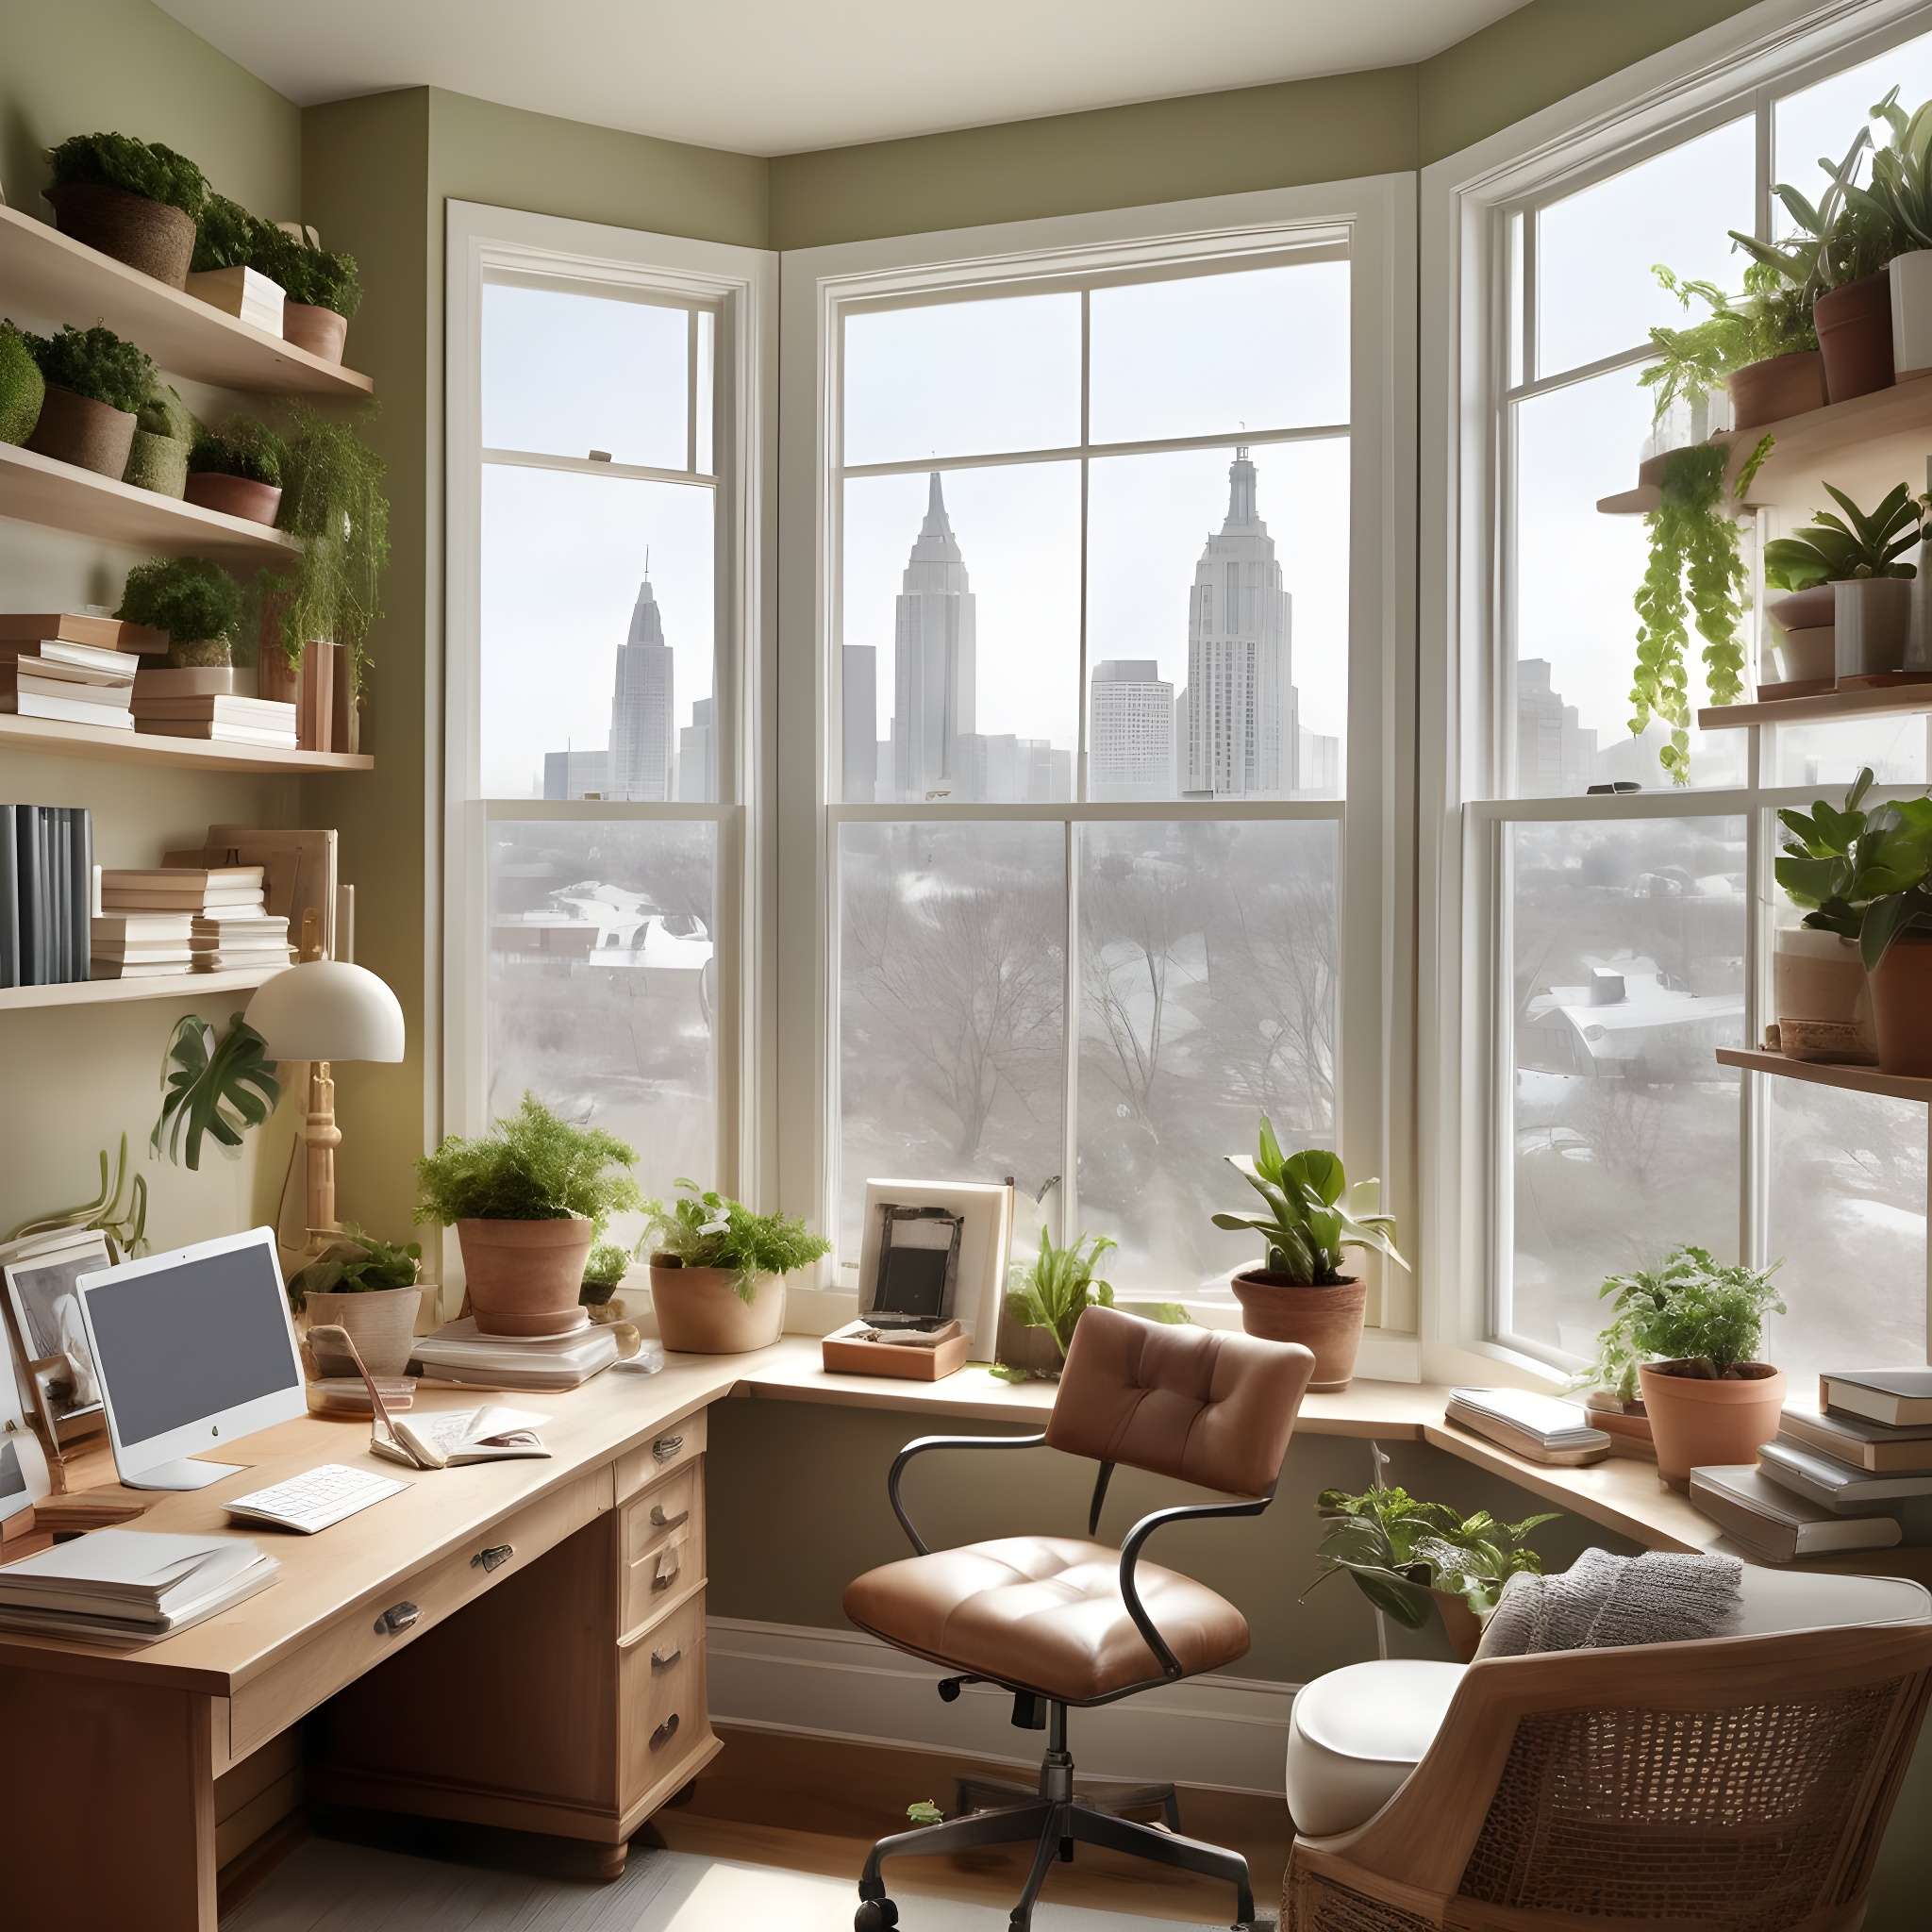 home workspace sunroom productive office plants